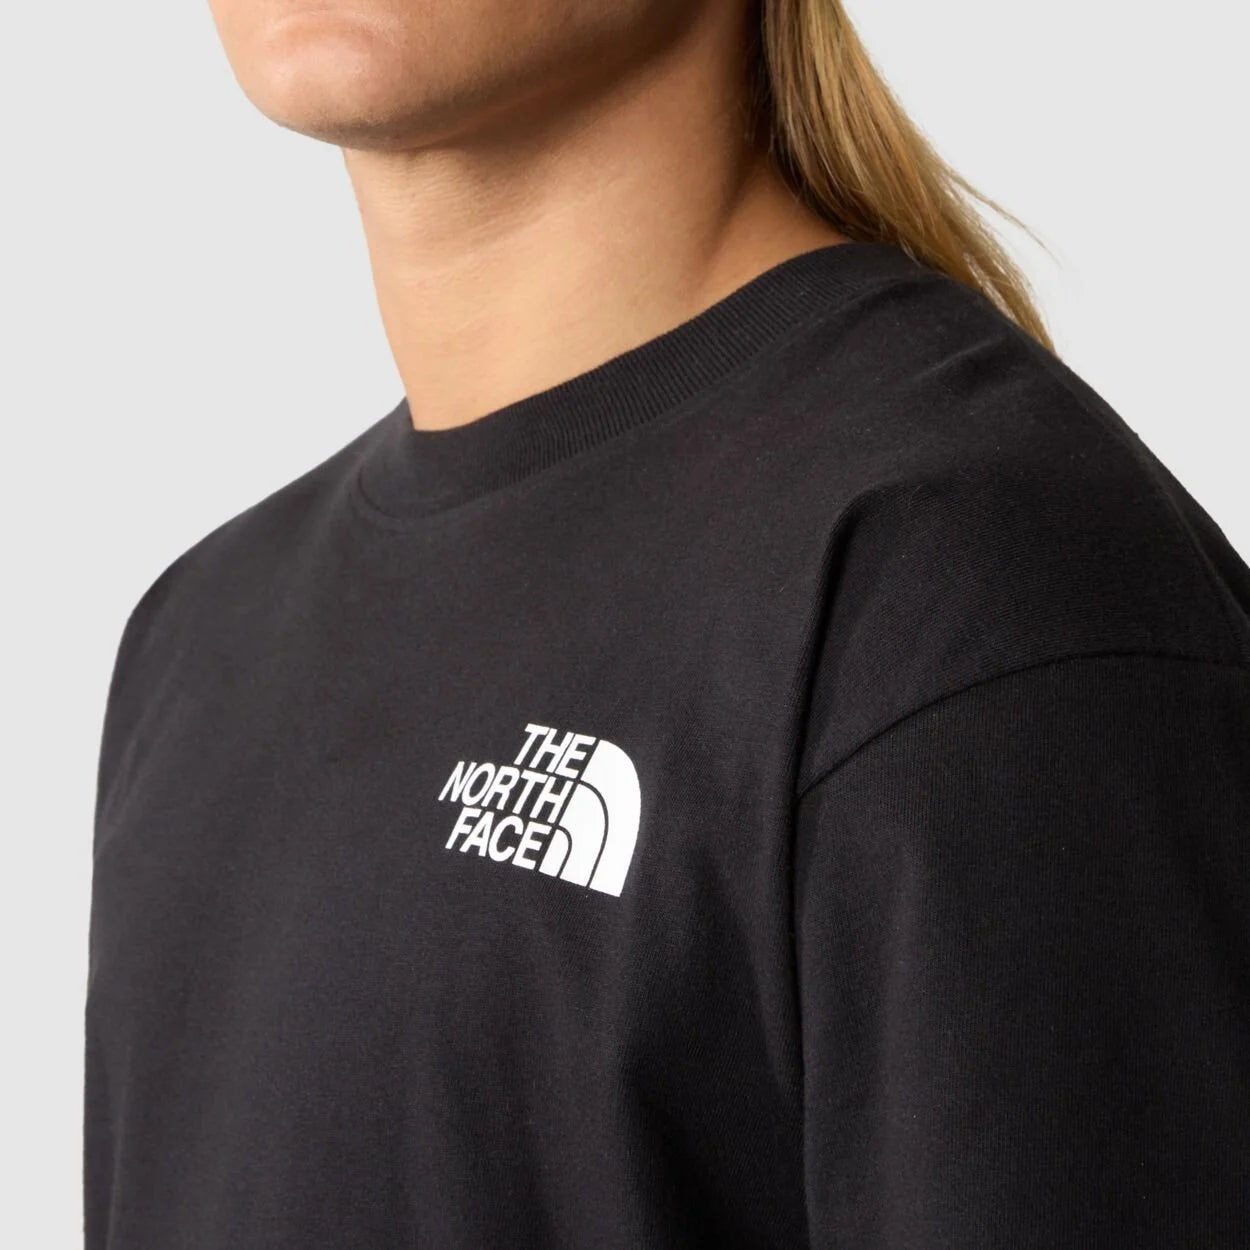 THE NORTHFACE MEN'S S/S HEAVYWEIGHT RELAXED TEE